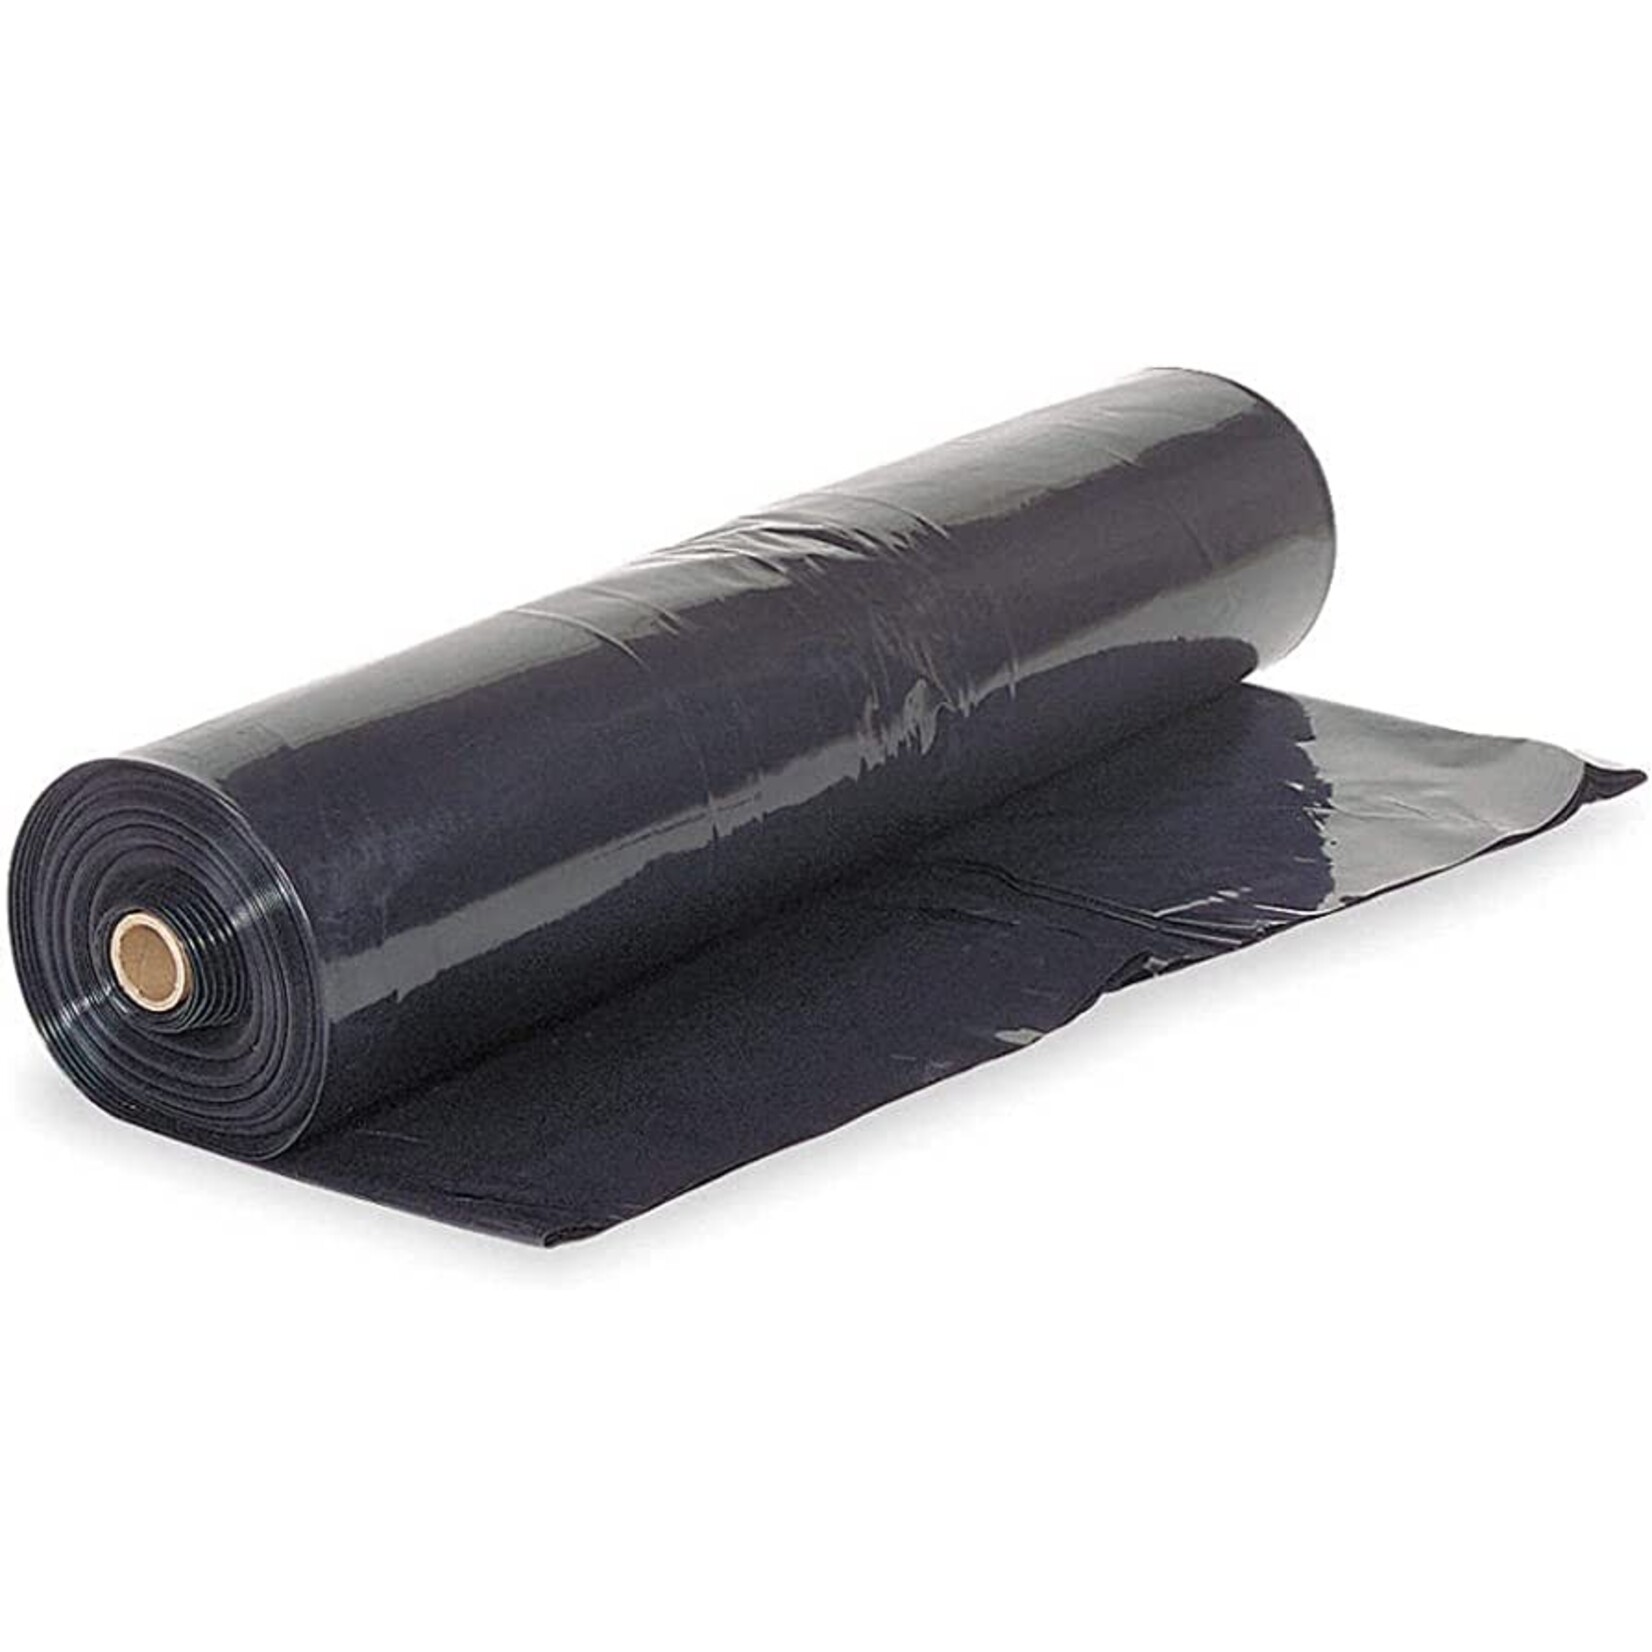 SteelCoat SteelCoat - Poly Sheeting - 6 MIL - 10' x 100' - Black